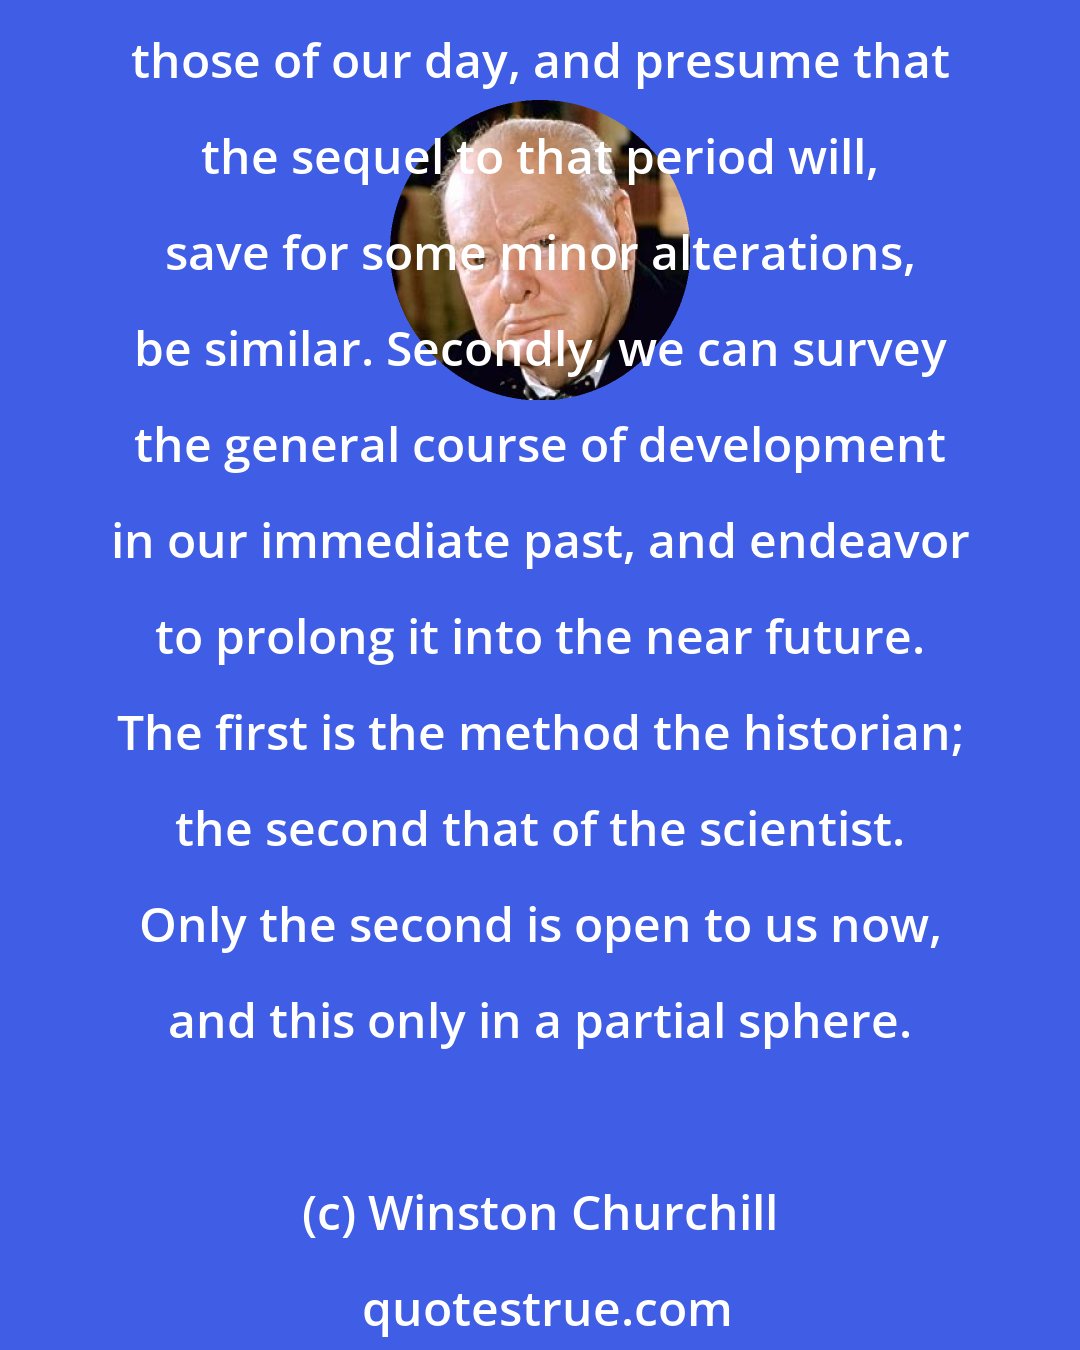 Winston Churchill: There are two processes which we adopt consciously or unconsciously when we try to prophesy. We can seek a period in the past whose conditions resemble as closely as possible those of our day, and presume that the sequel to that period will, save for some minor alterations, be similar. Secondly, we can survey the general course of development in our immediate past, and endeavor to prolong it into the near future. The first is the method the historian; the second that of the scientist. Only the second is open to us now, and this only in a partial sphere.